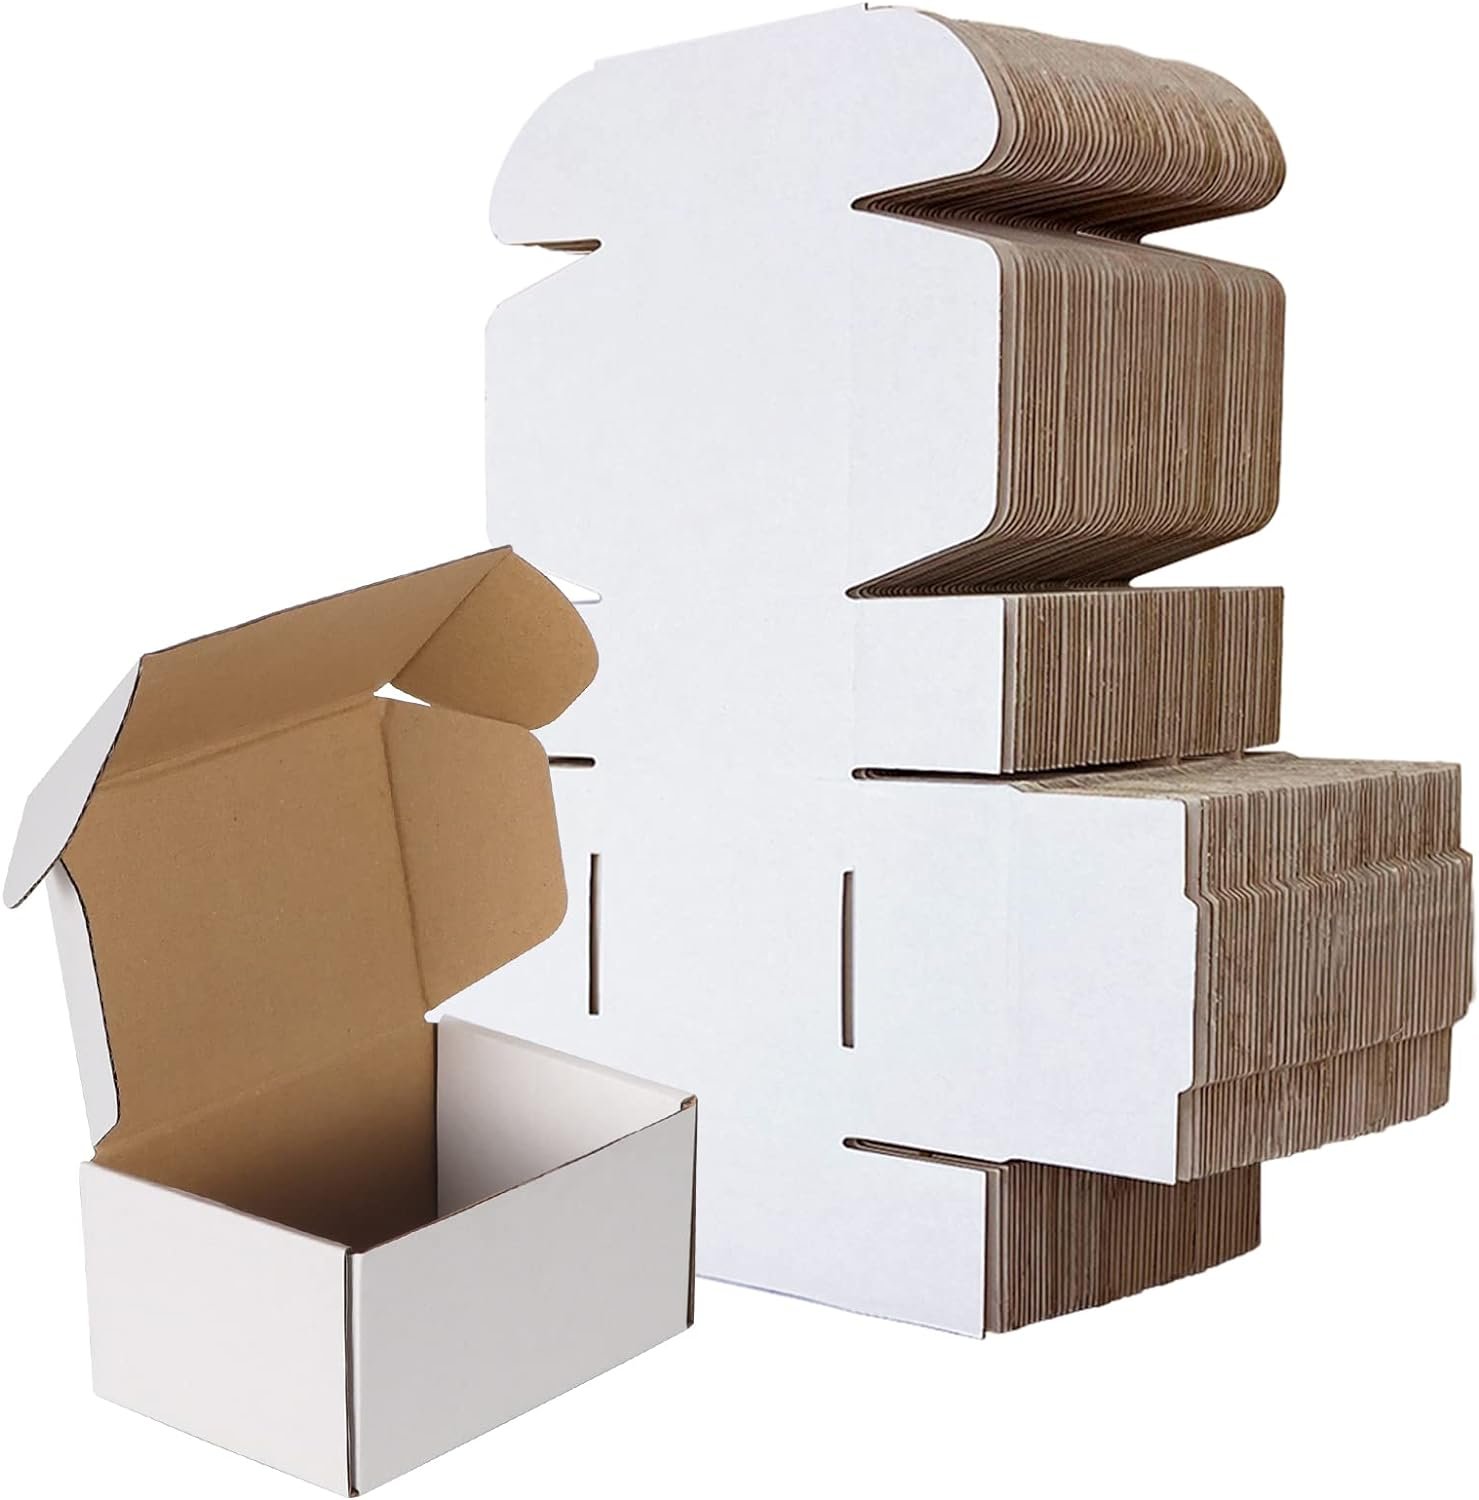 RLAVBL 6x4x3 Shipping Boxes Set of 50 Review